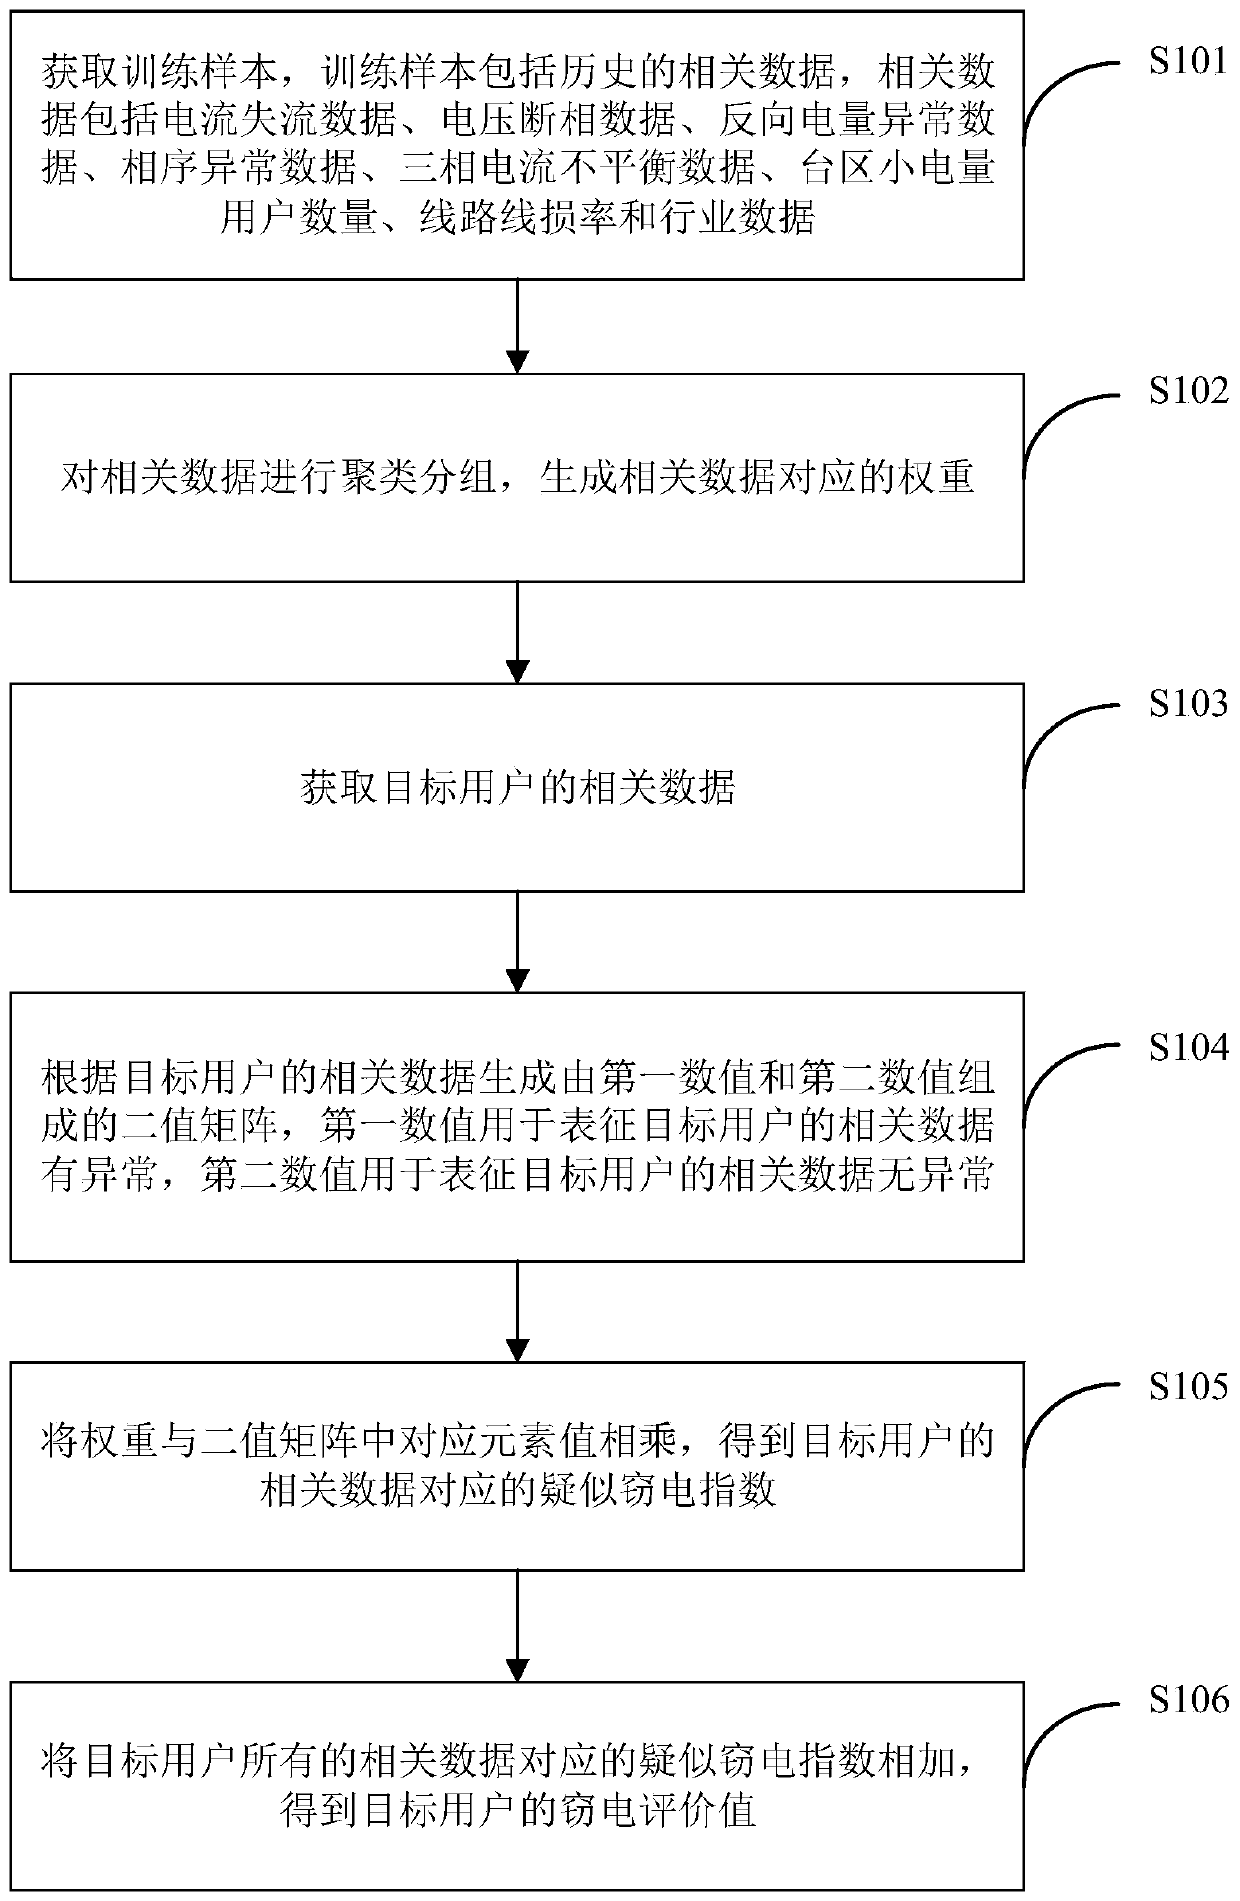 A self-adaptive anti-stealing electricity monitoring method and system based on an electricity consumption information collection system